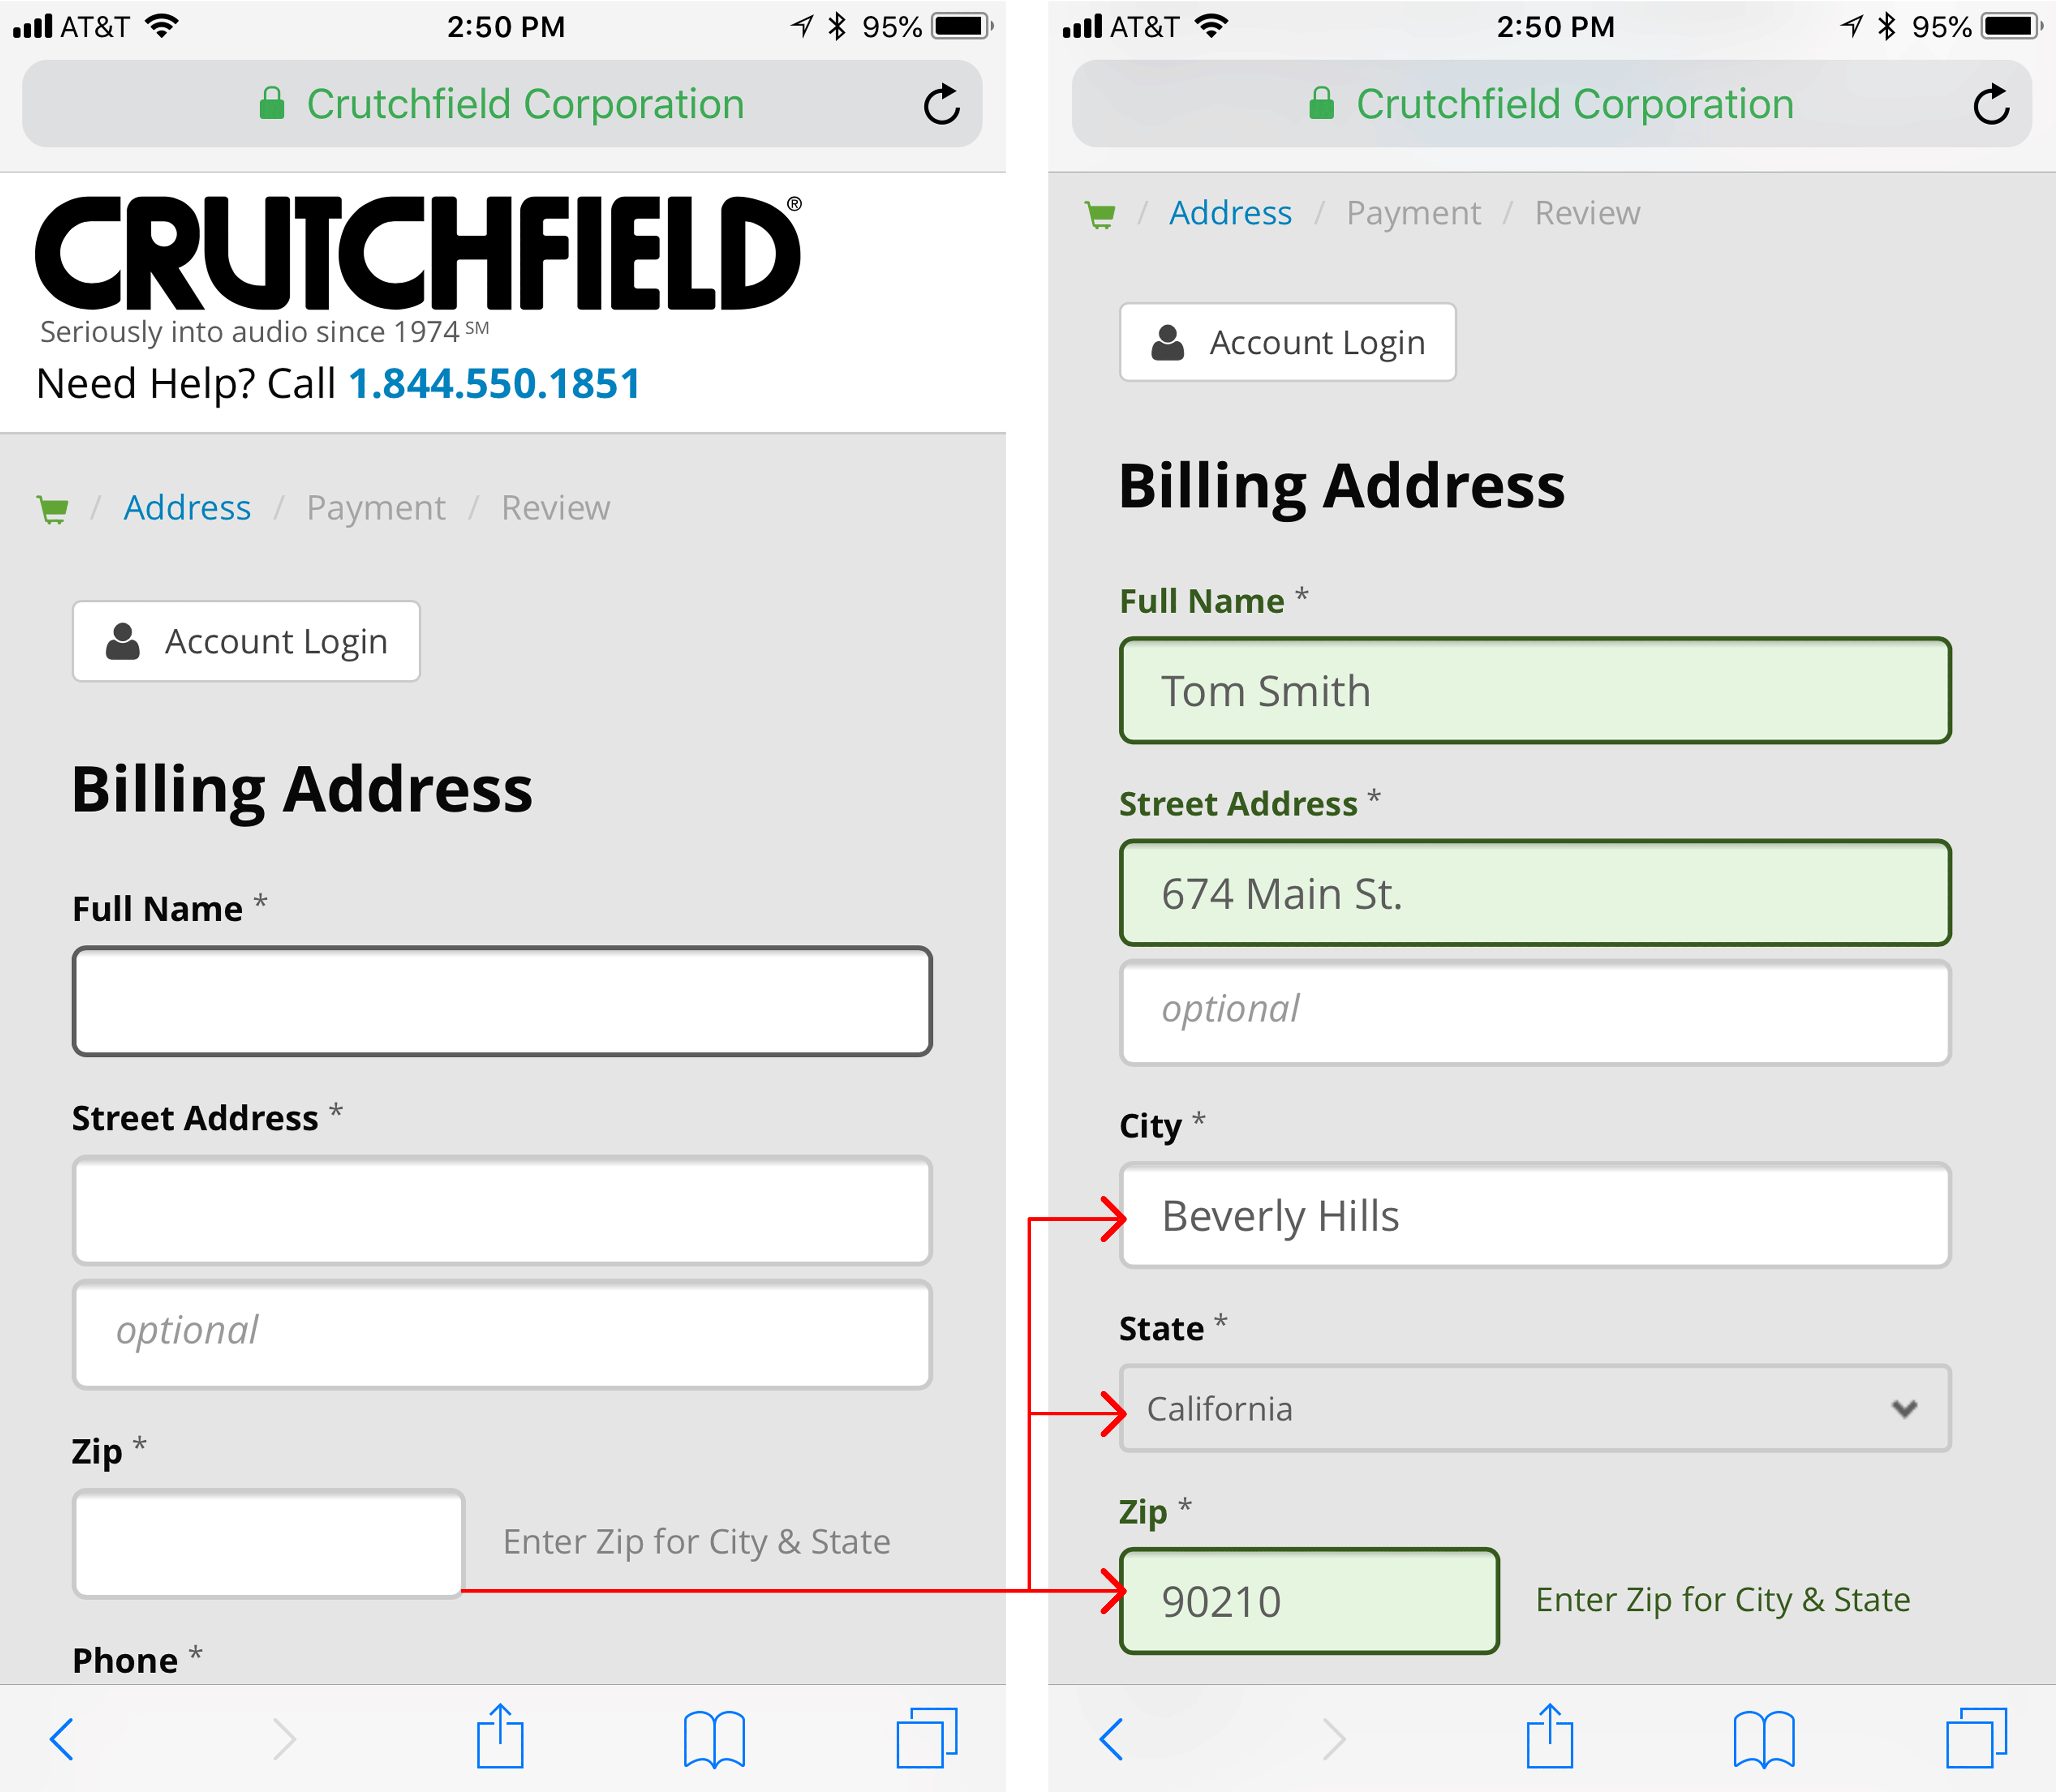 Crutchfield uses mobile autofill in their forms.